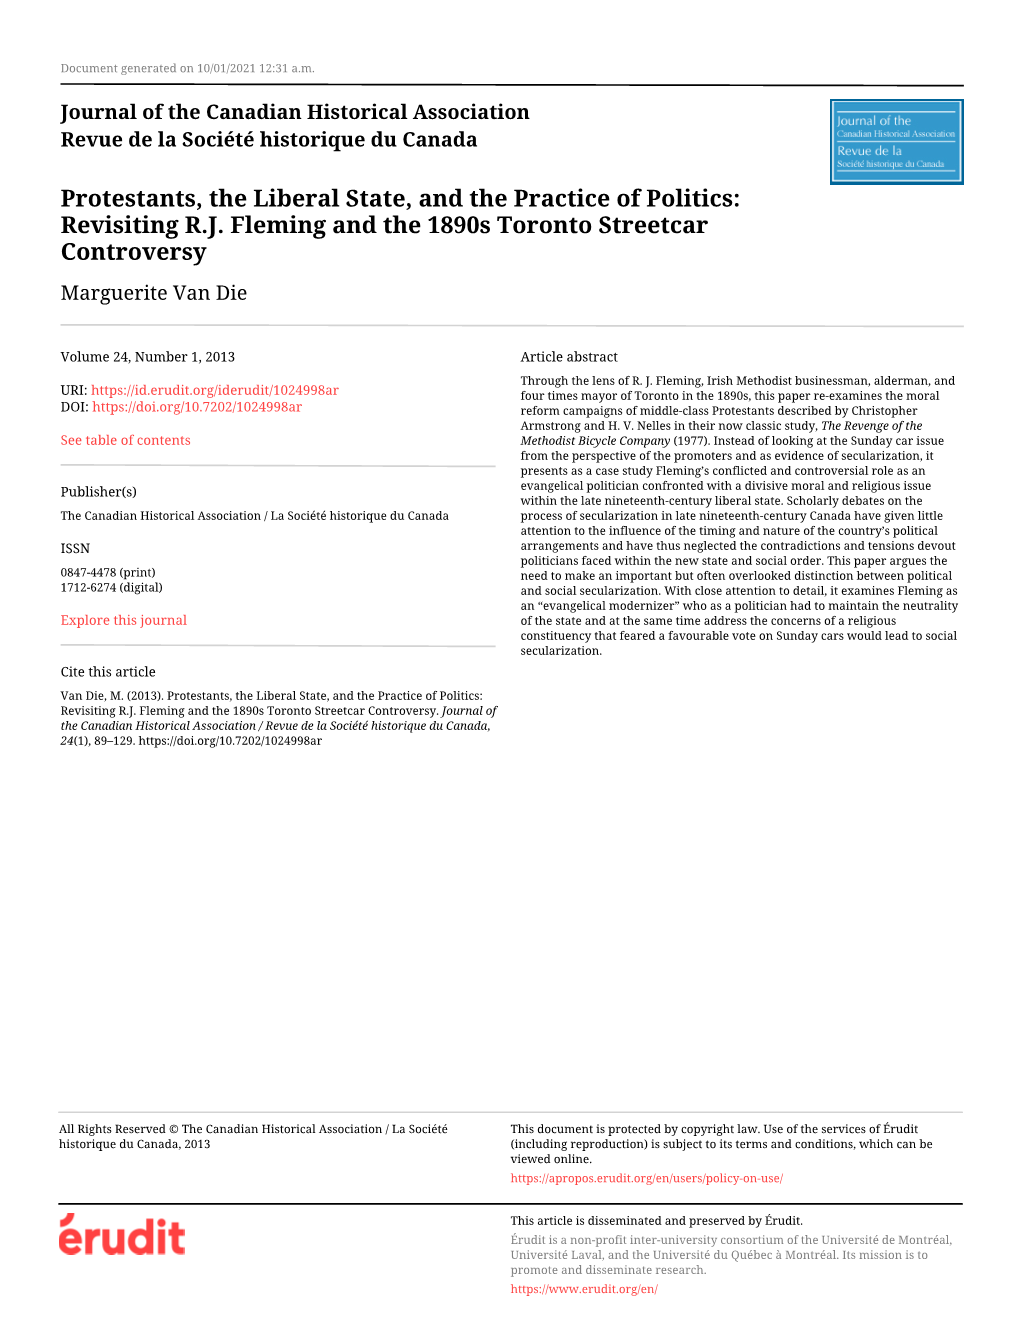 Protestants, the Liberal State, and the Practice of Politics: Revisiting R.J